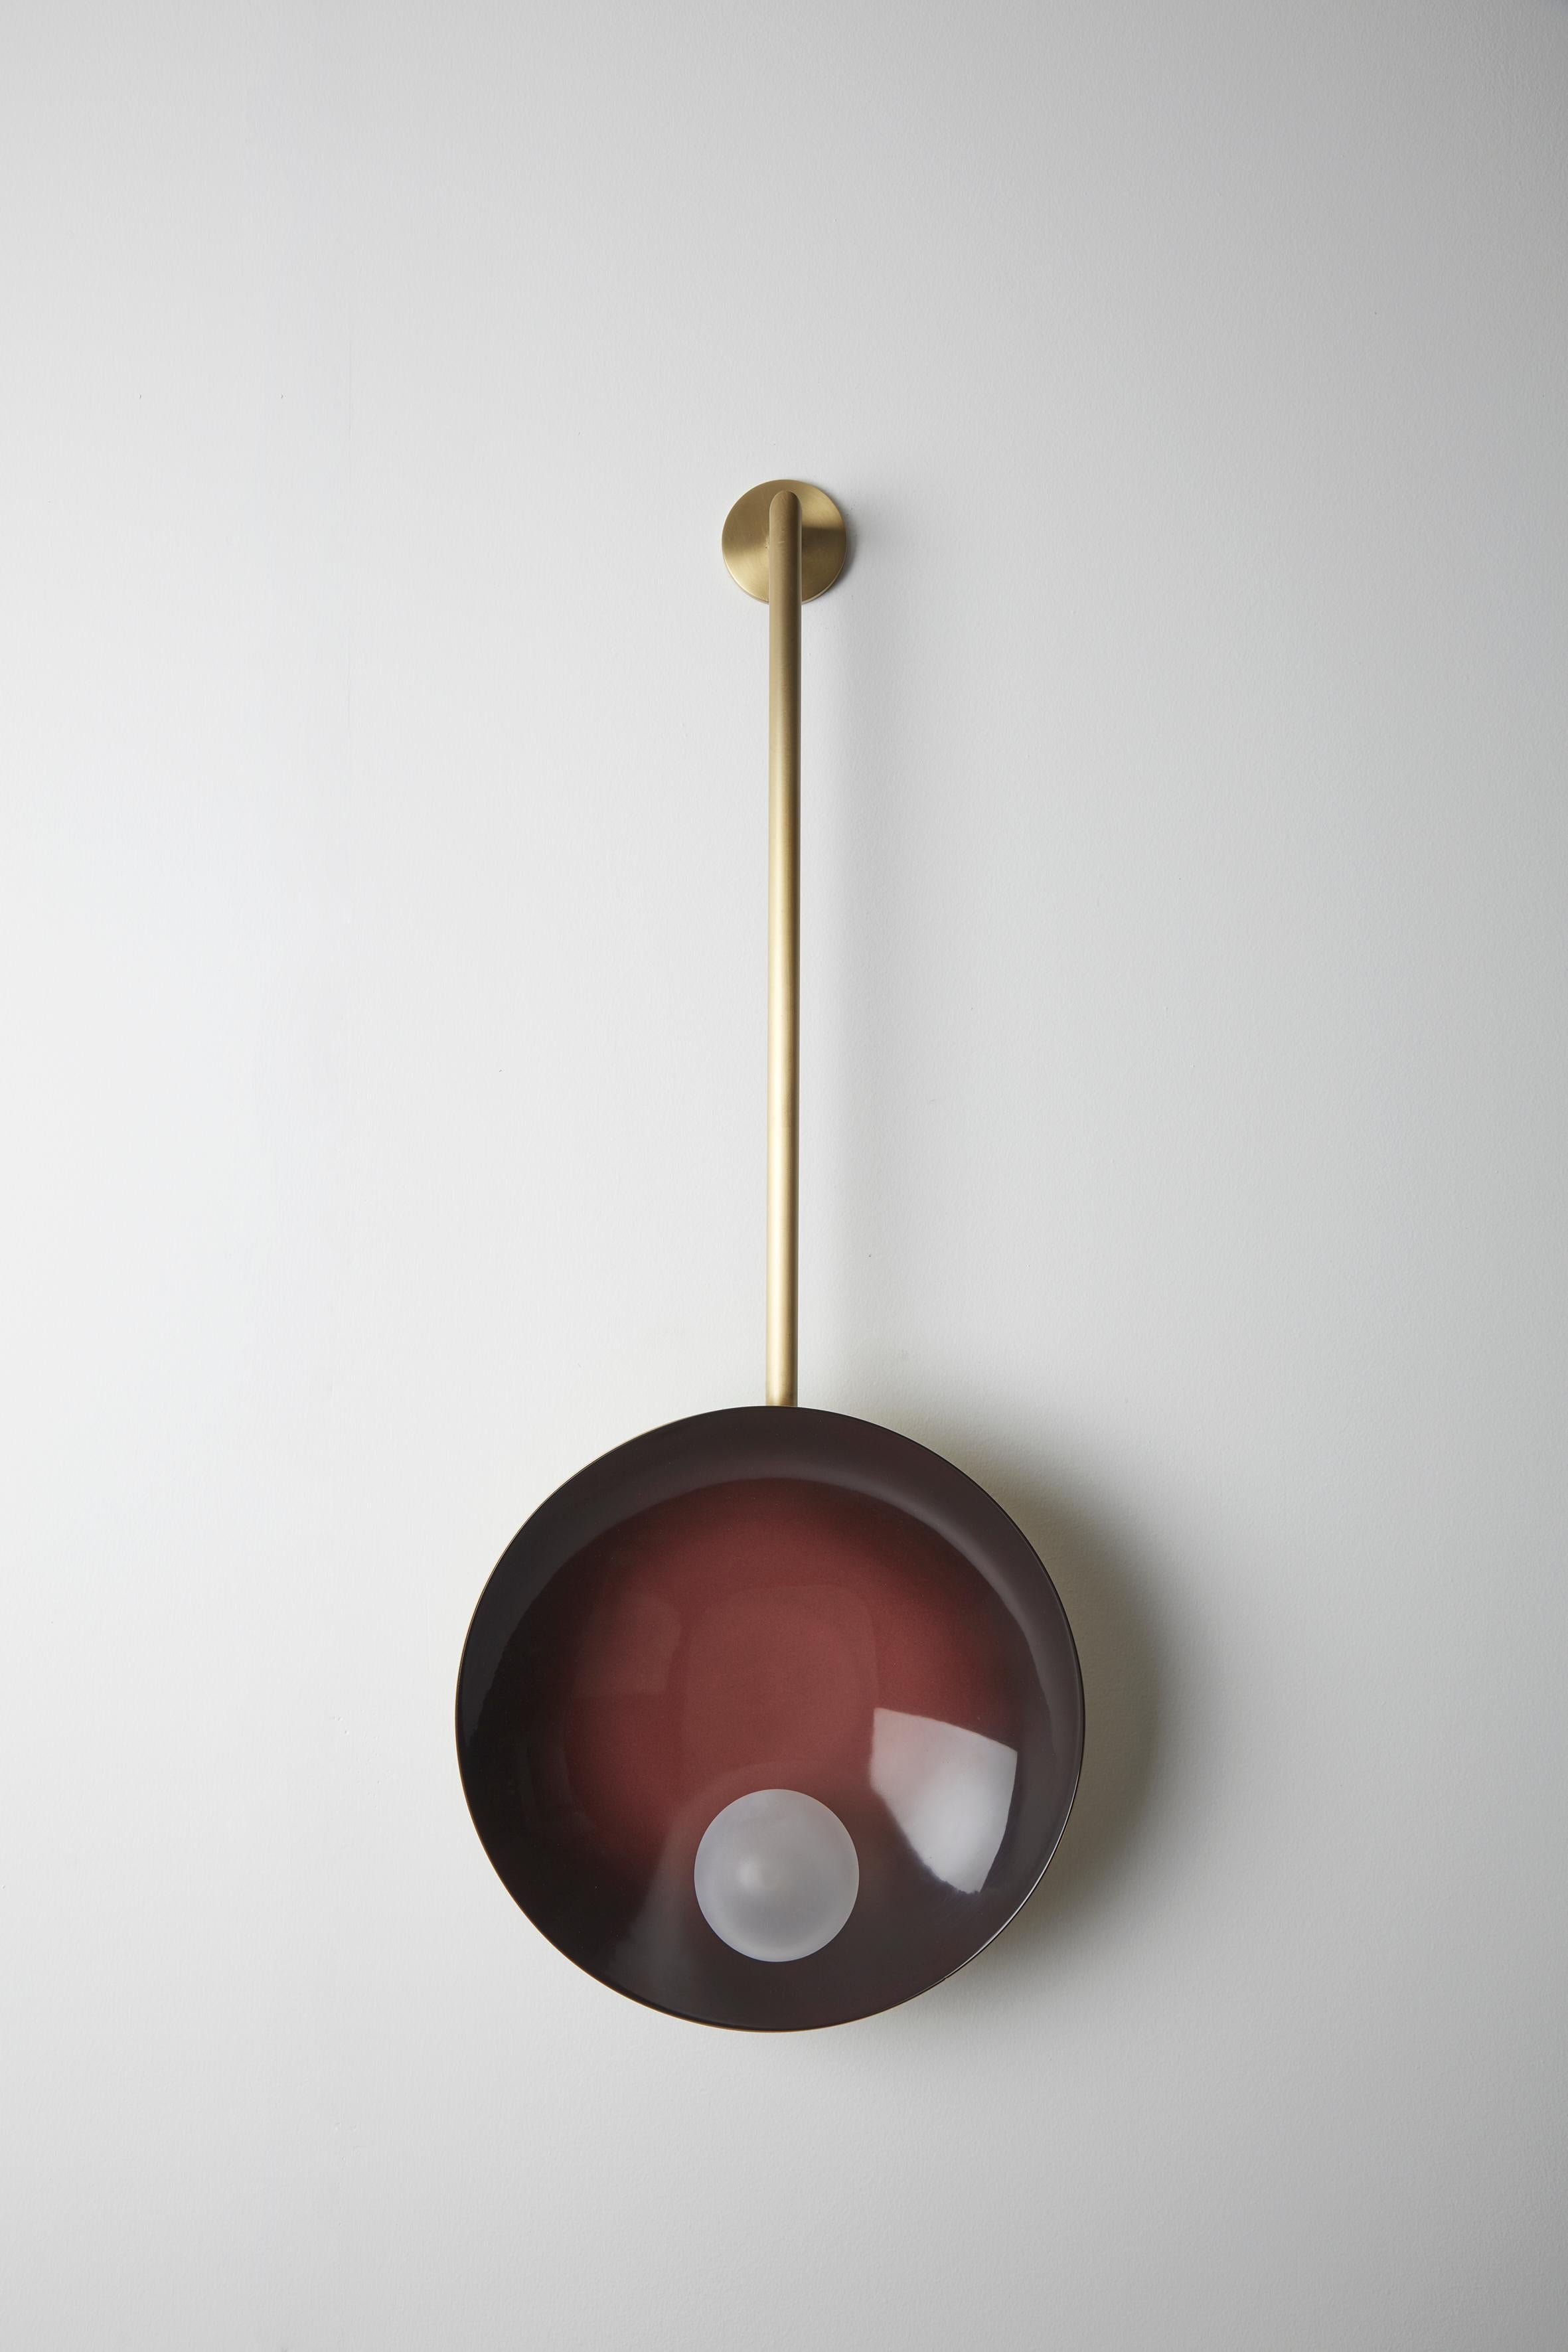 Oyster wall mounted burgundy, Carla Baz
Dimensions: ø 30 x H 78 x D 14 cm
Weight: 2 kg
Material: brass, blown satin glass globes

Oyster is a series of sculptural lighting pieces that were developed in 2016. Wanting to explore the idea of